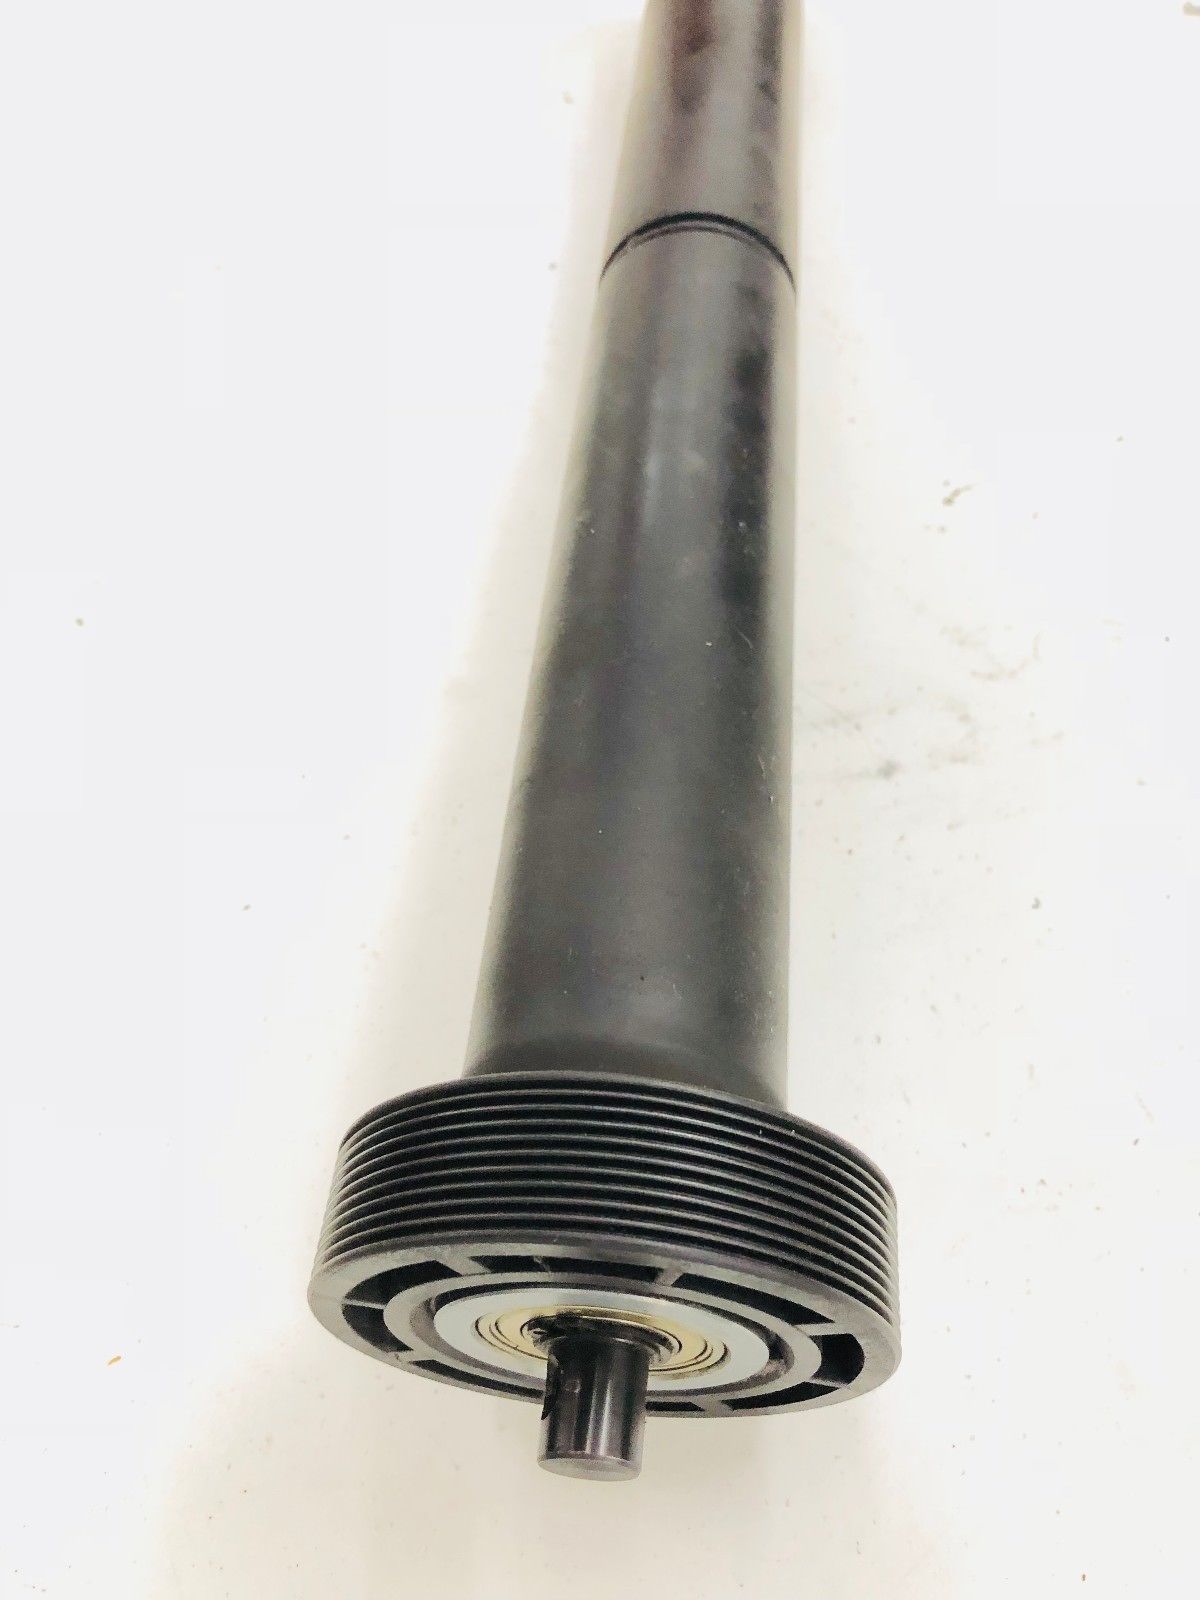 SportsArt 3106 Treadmill 1200N 1210 3110 3150 1260N Front Drive Roller P29120053 (Used)